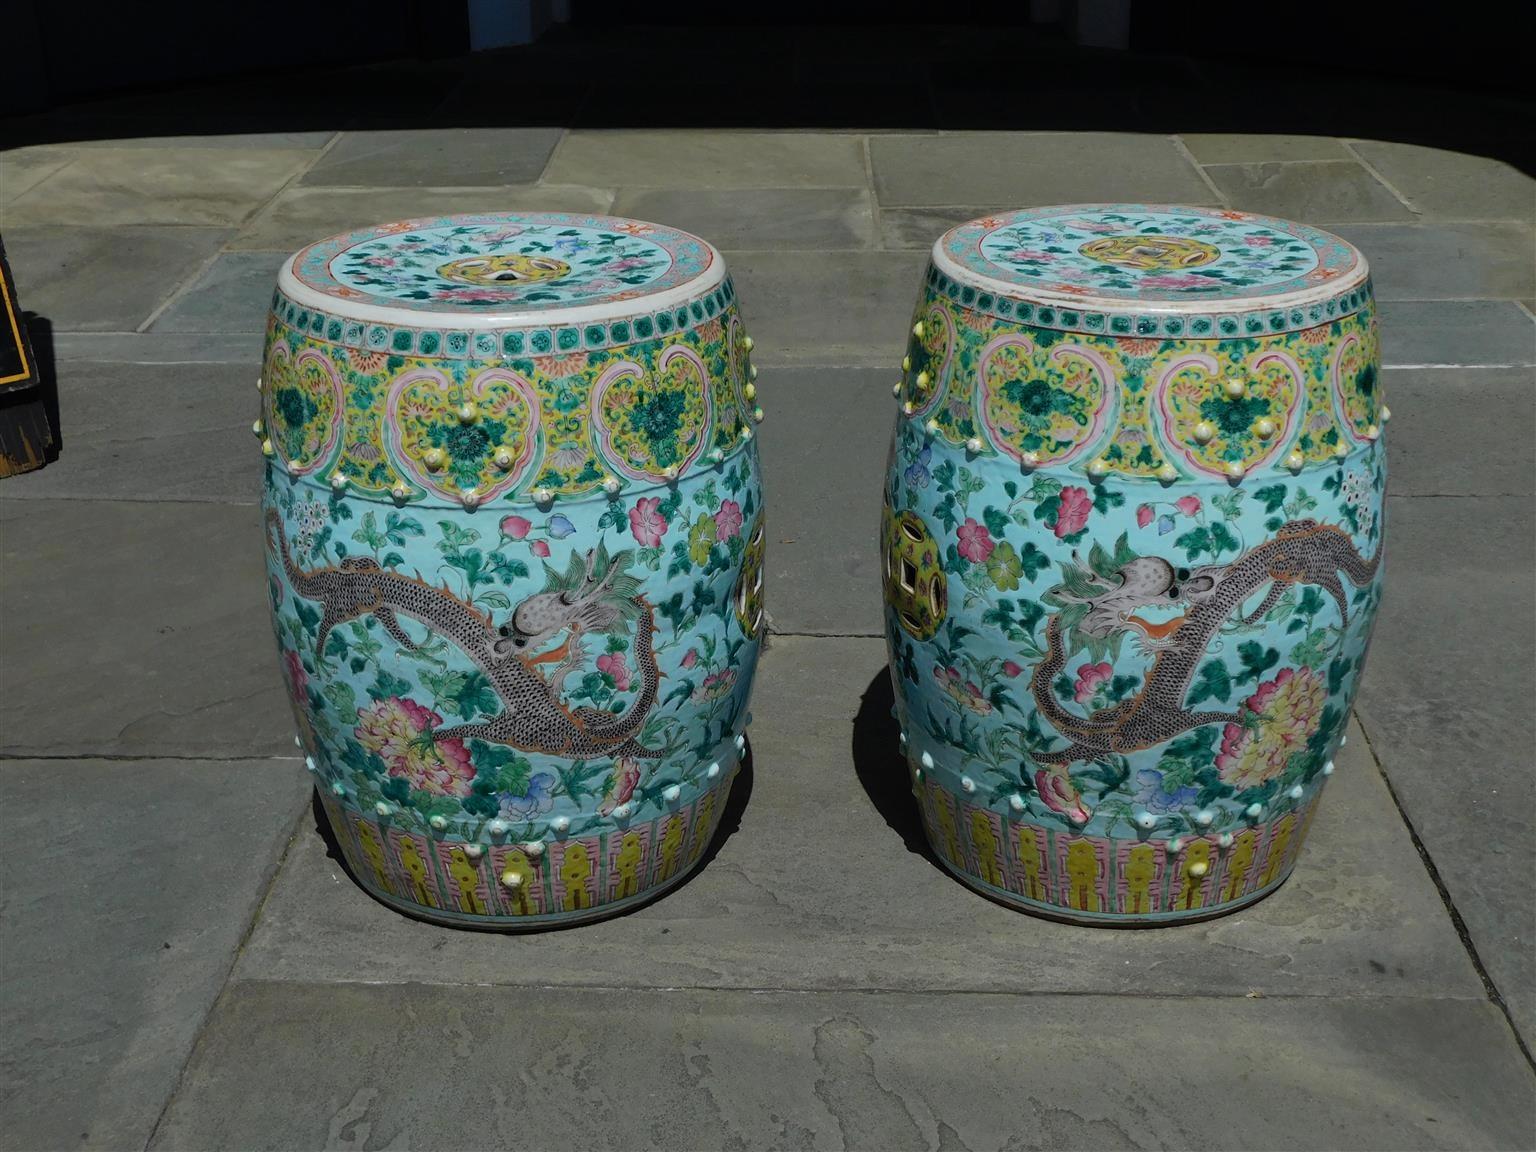 Pair of Chinese Porcelain Painted Garden Seats w/ Dragons & Exotic Birds, C 1820 For Sale 4